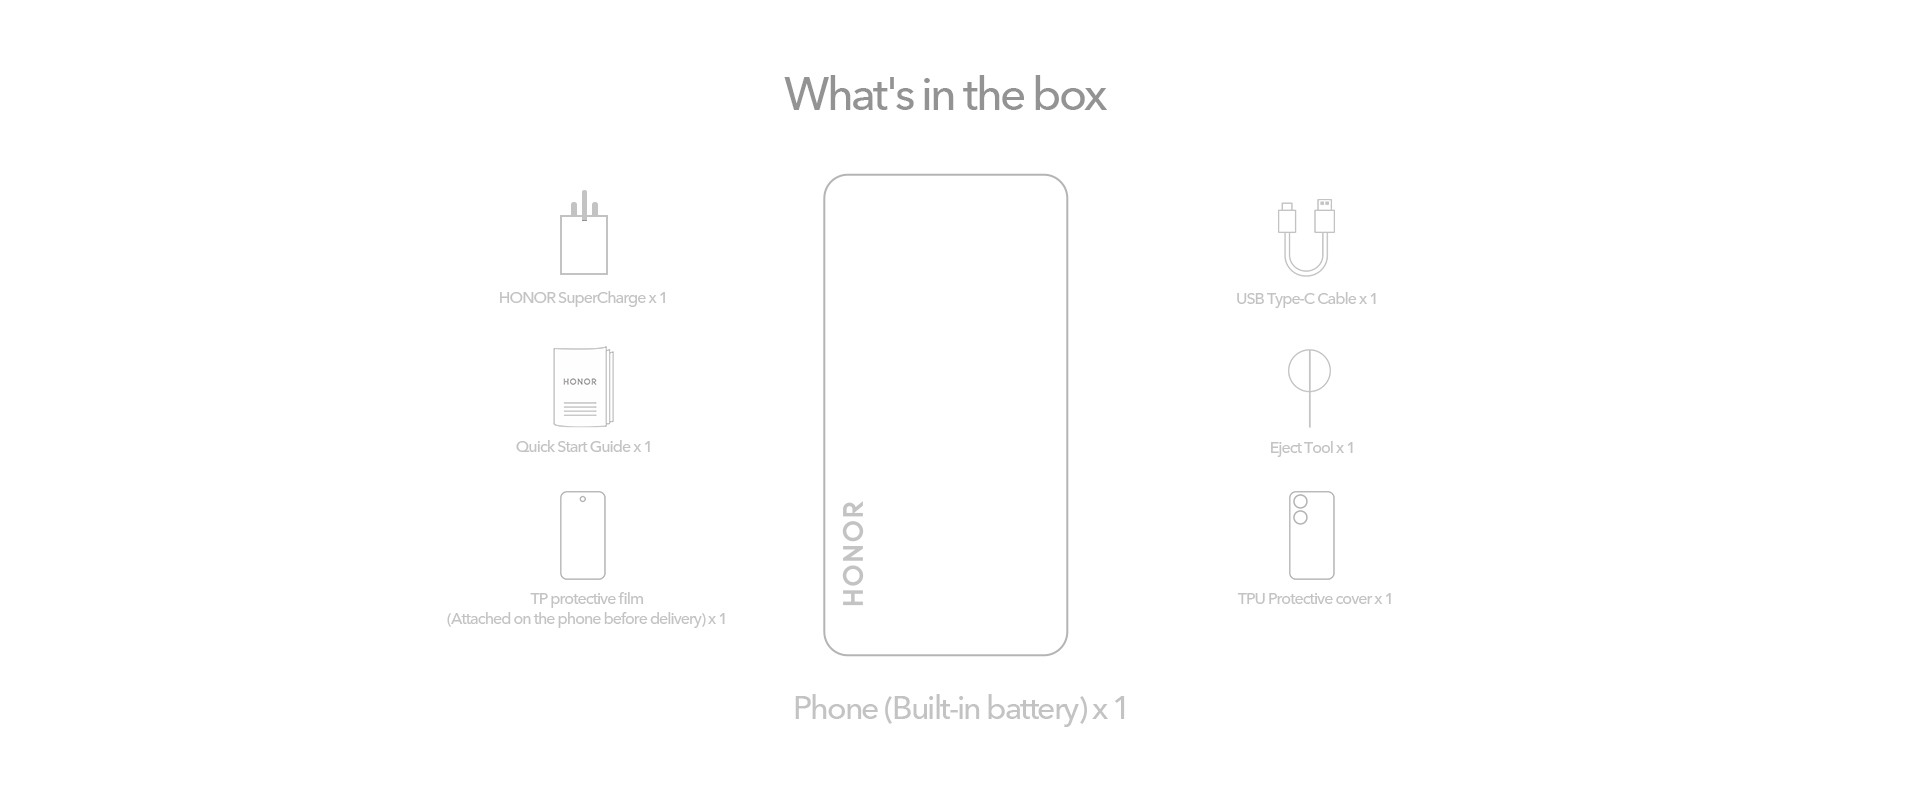 There are Phone (Built-in battery), Quick Start Guide, HONOR SuperCharge, USB Type-C Cable, Eject Tool, TPU Protective cover and TP protective film in the box. 